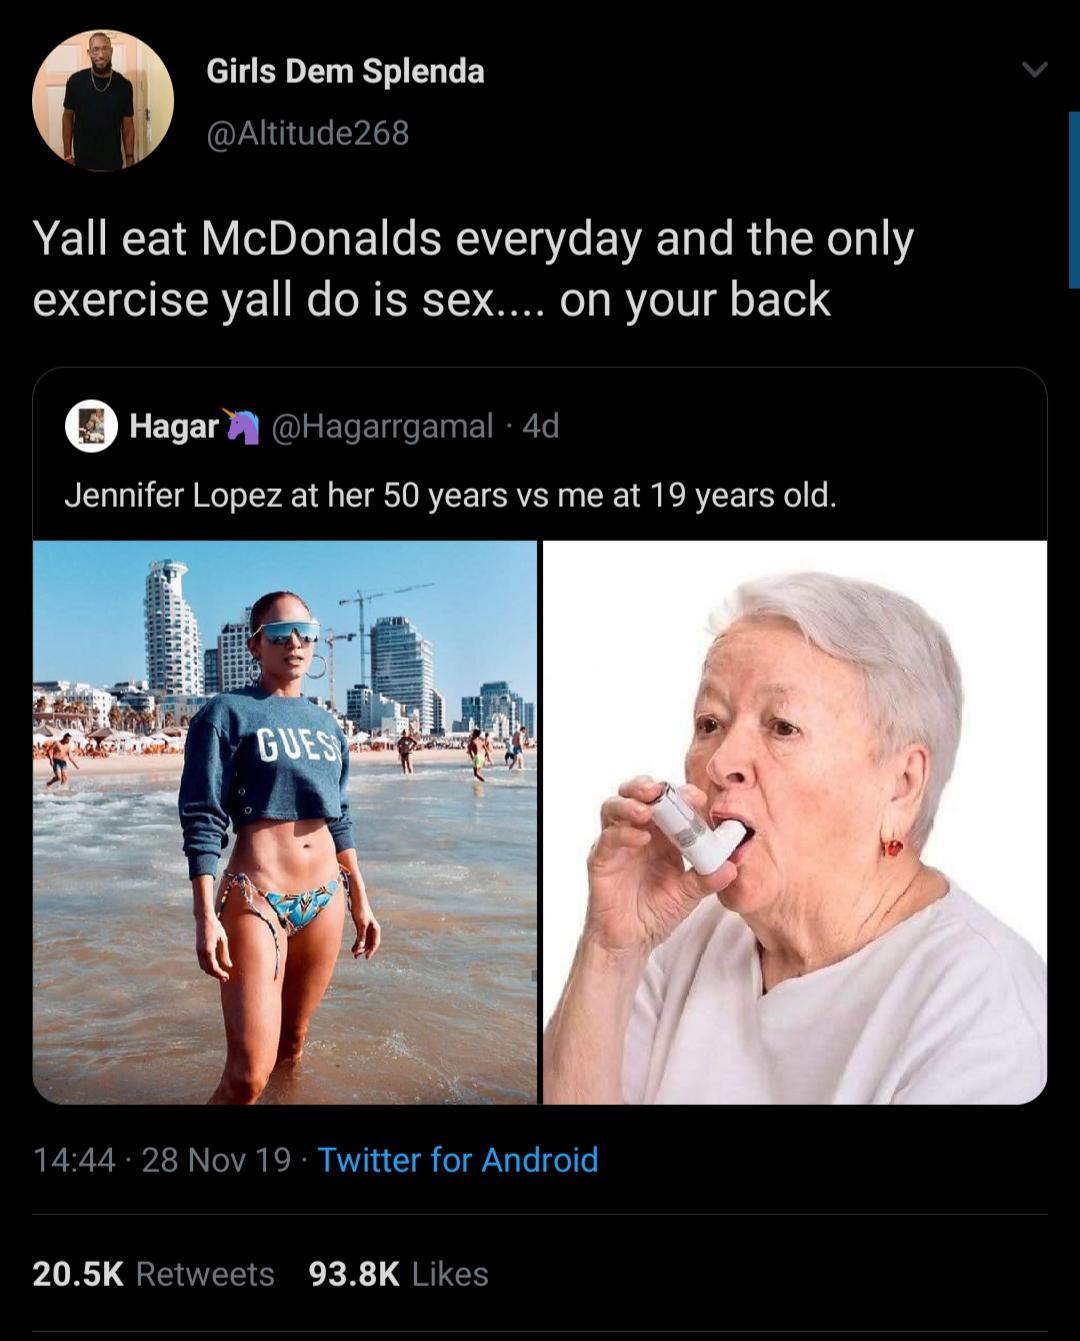 photo caption - Girls Dem Splenda Yall eat McDonalds everyday and the only exercise yall do is sex.... on your back Hagar 4d Jennifer Lopez at her 50 years vs me at 19 years old. Gues 28 Nov 19 Twitter for Android